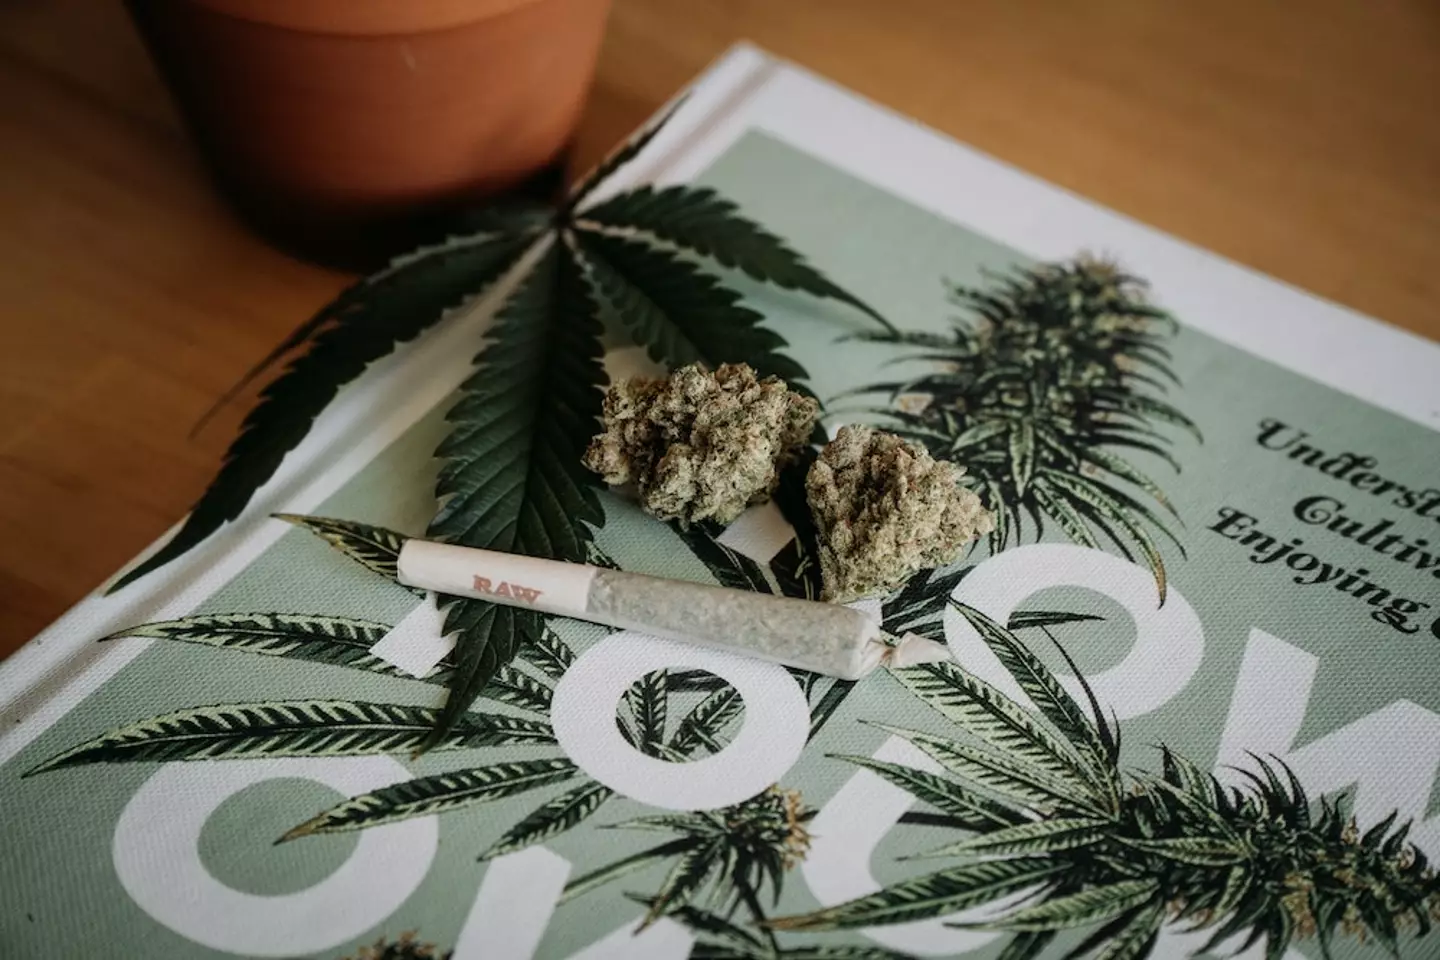 Germany is one step closer to legalising cannabis for recreational purposes.